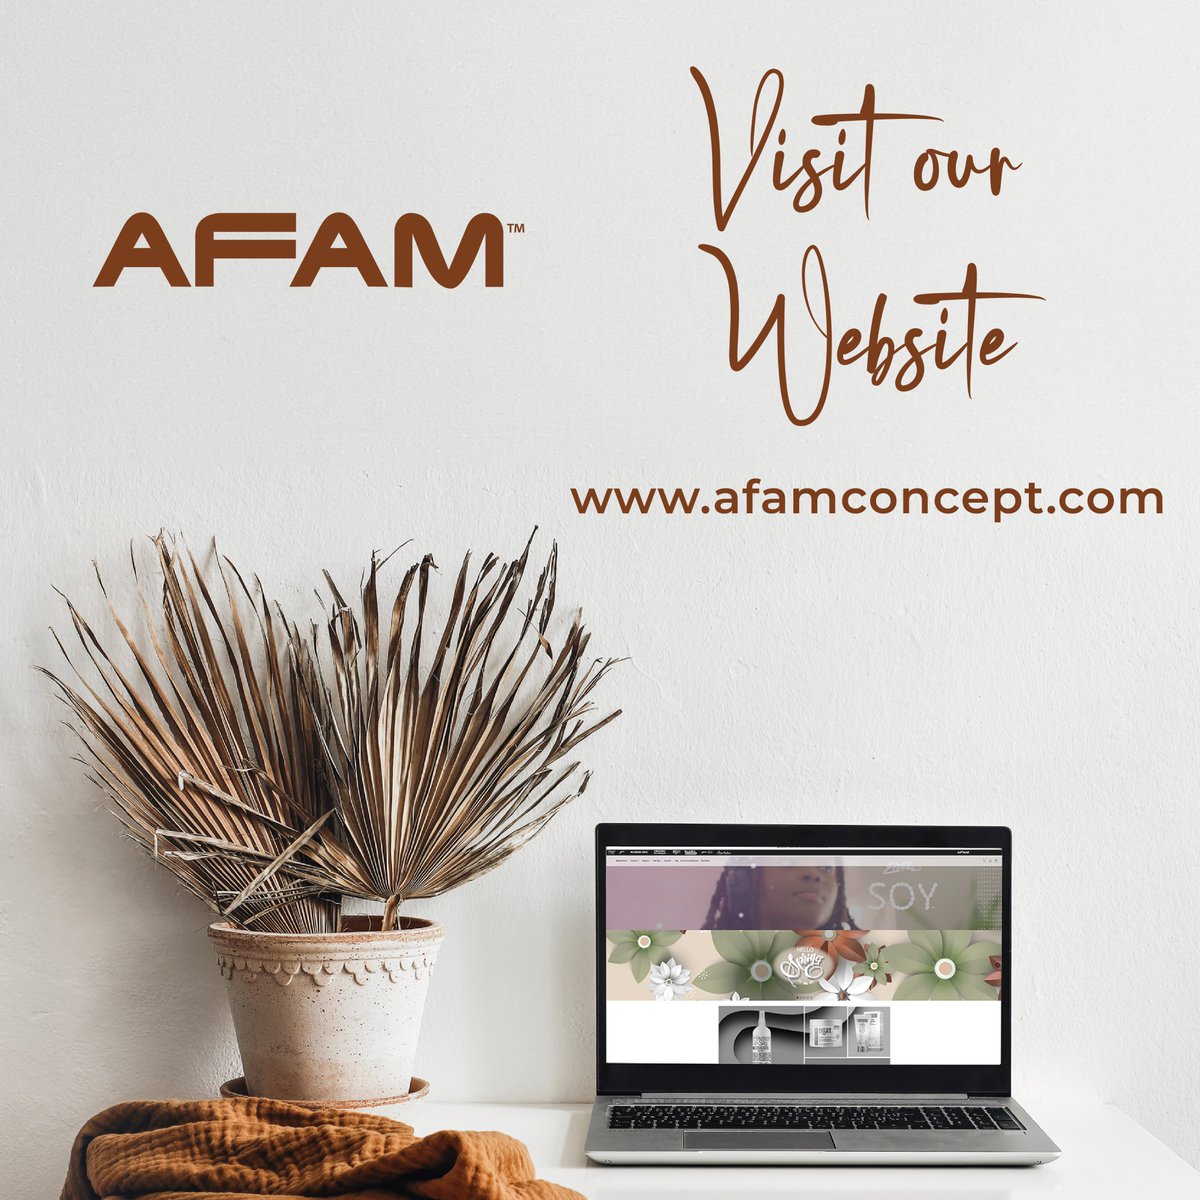 Visit our website for expert tips, product recommendations, and exclusive offers.

Let's celebrate the beauty of natural hair!
.
.
#naturalhairproducts #healthyhair #afamconcept #visitourwebsite #exculsivedeals